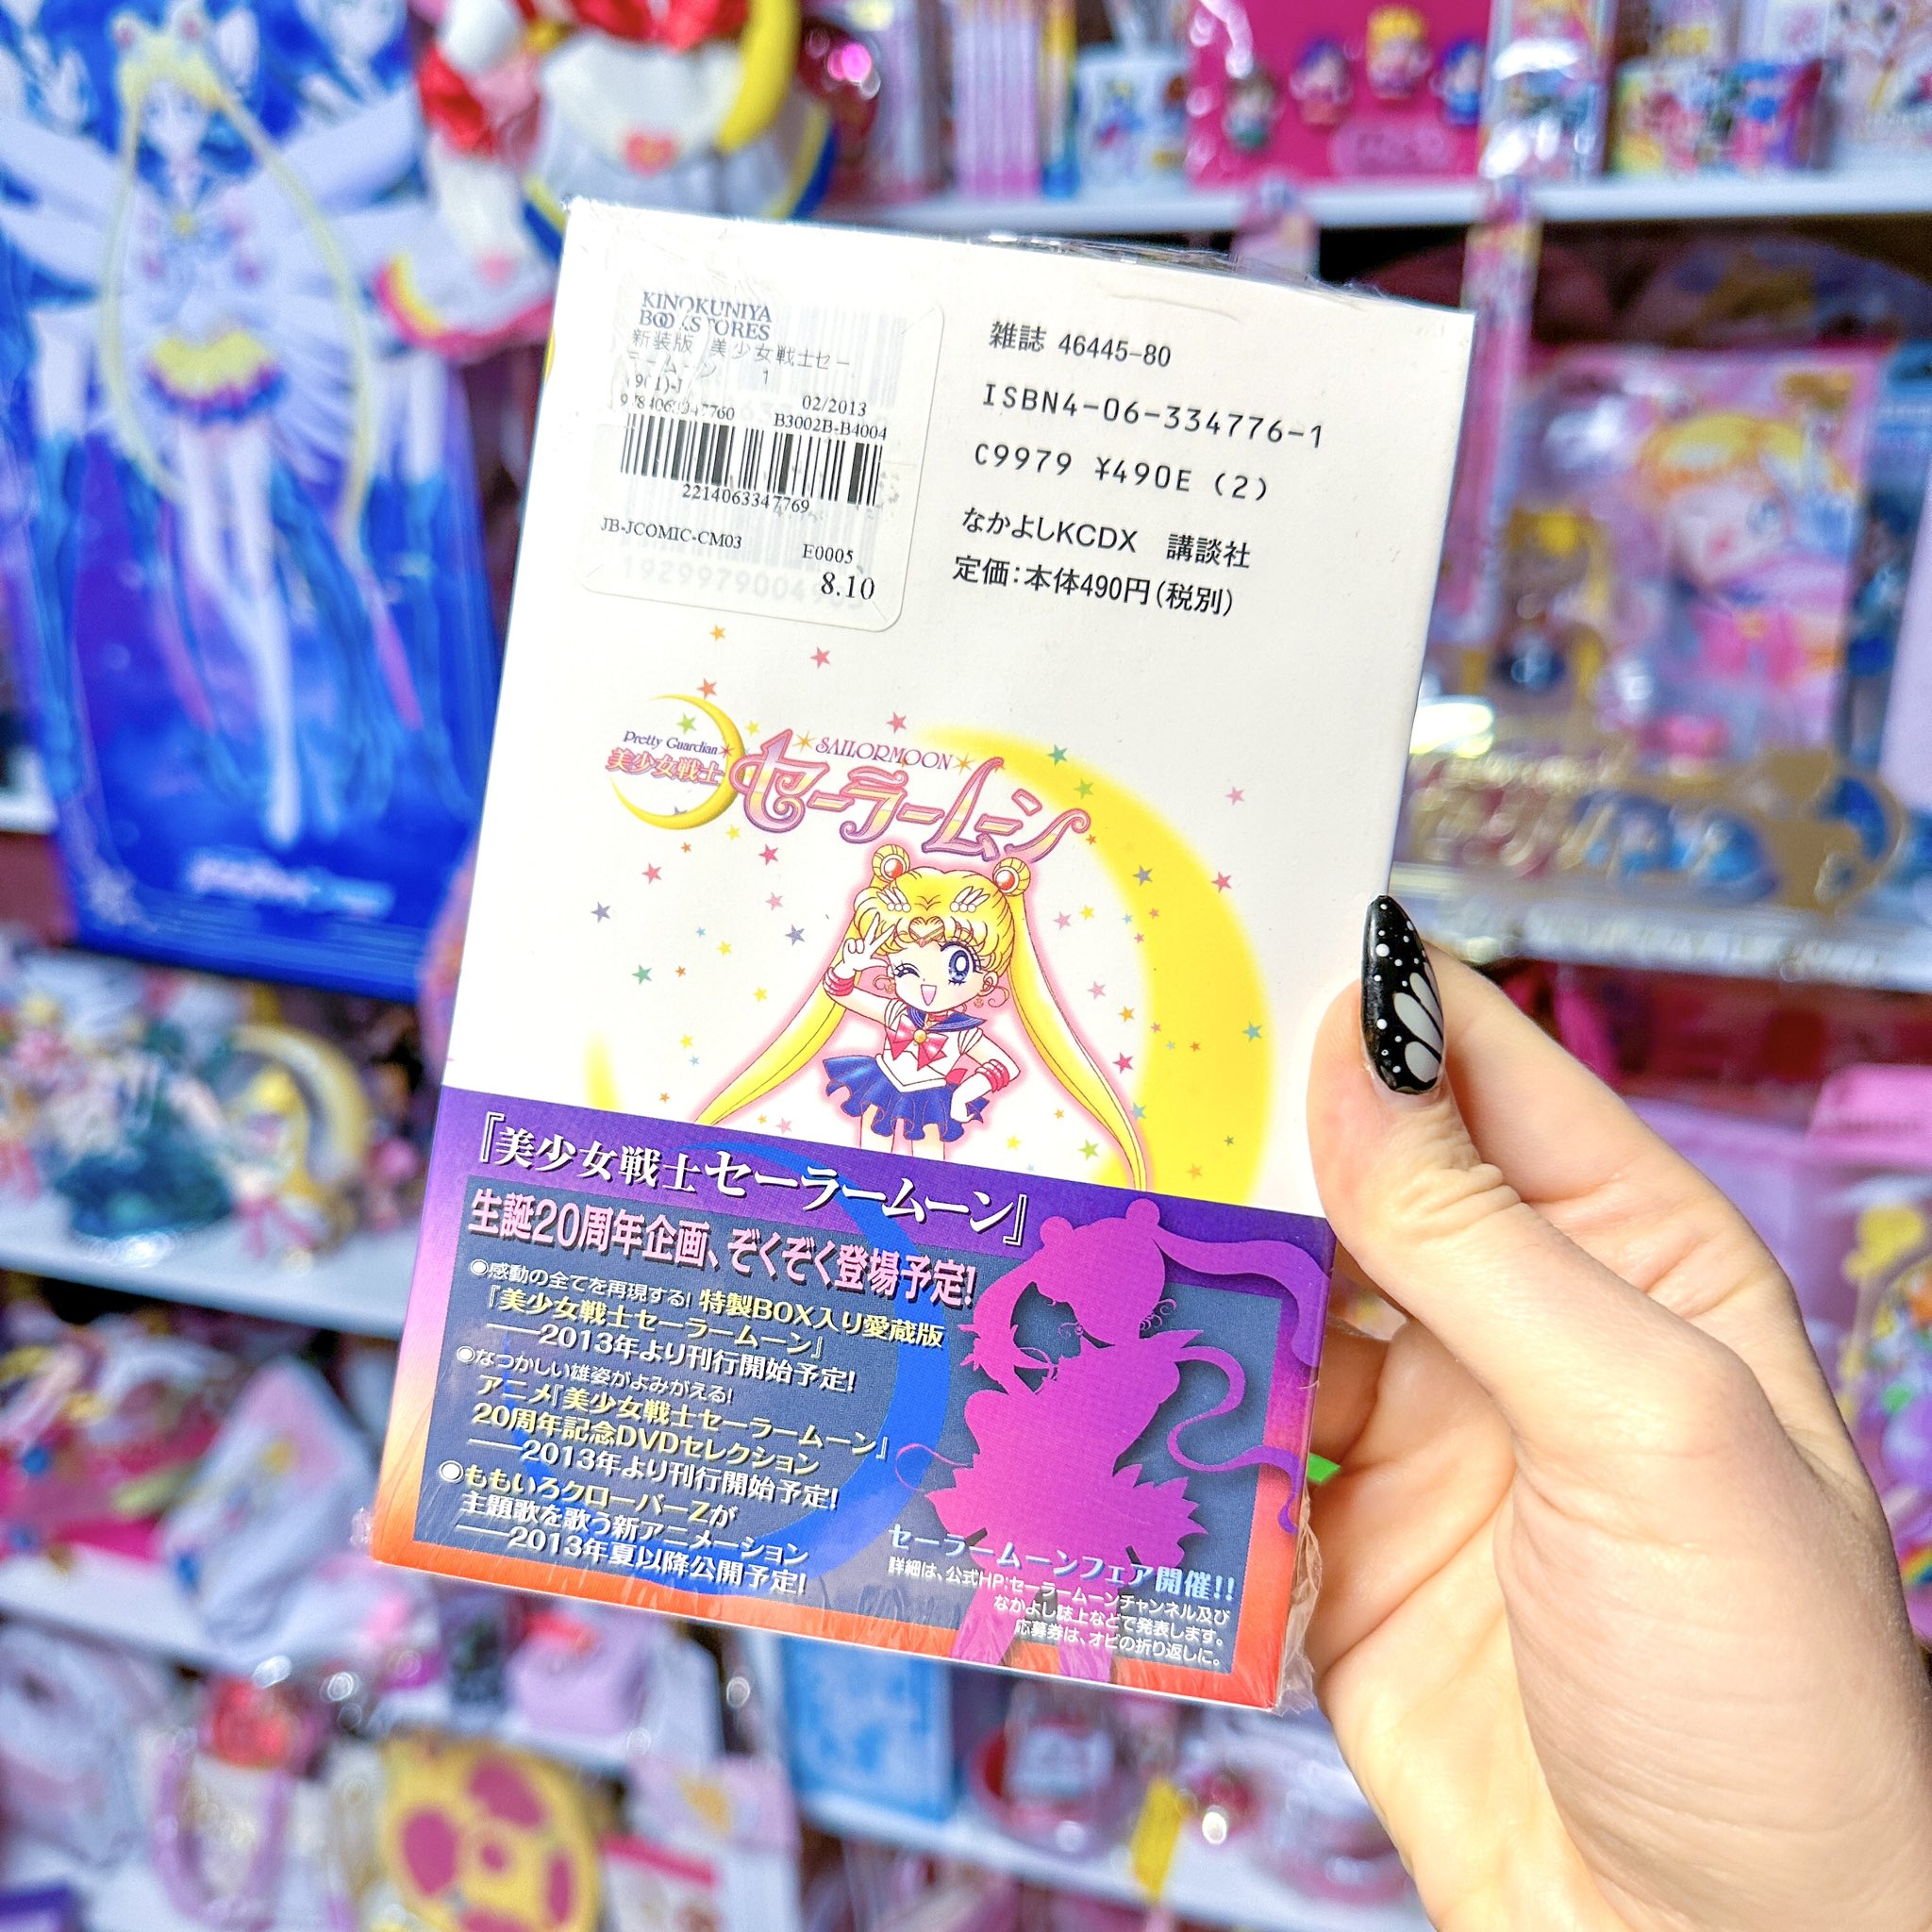 Sailor Moon News on X: A wonderful member of my discord community shared  these two new #SailorMoon merchandise sightings. A new bag (Hot Topic) and  a new rice cooker (BoxLunch) Once they're